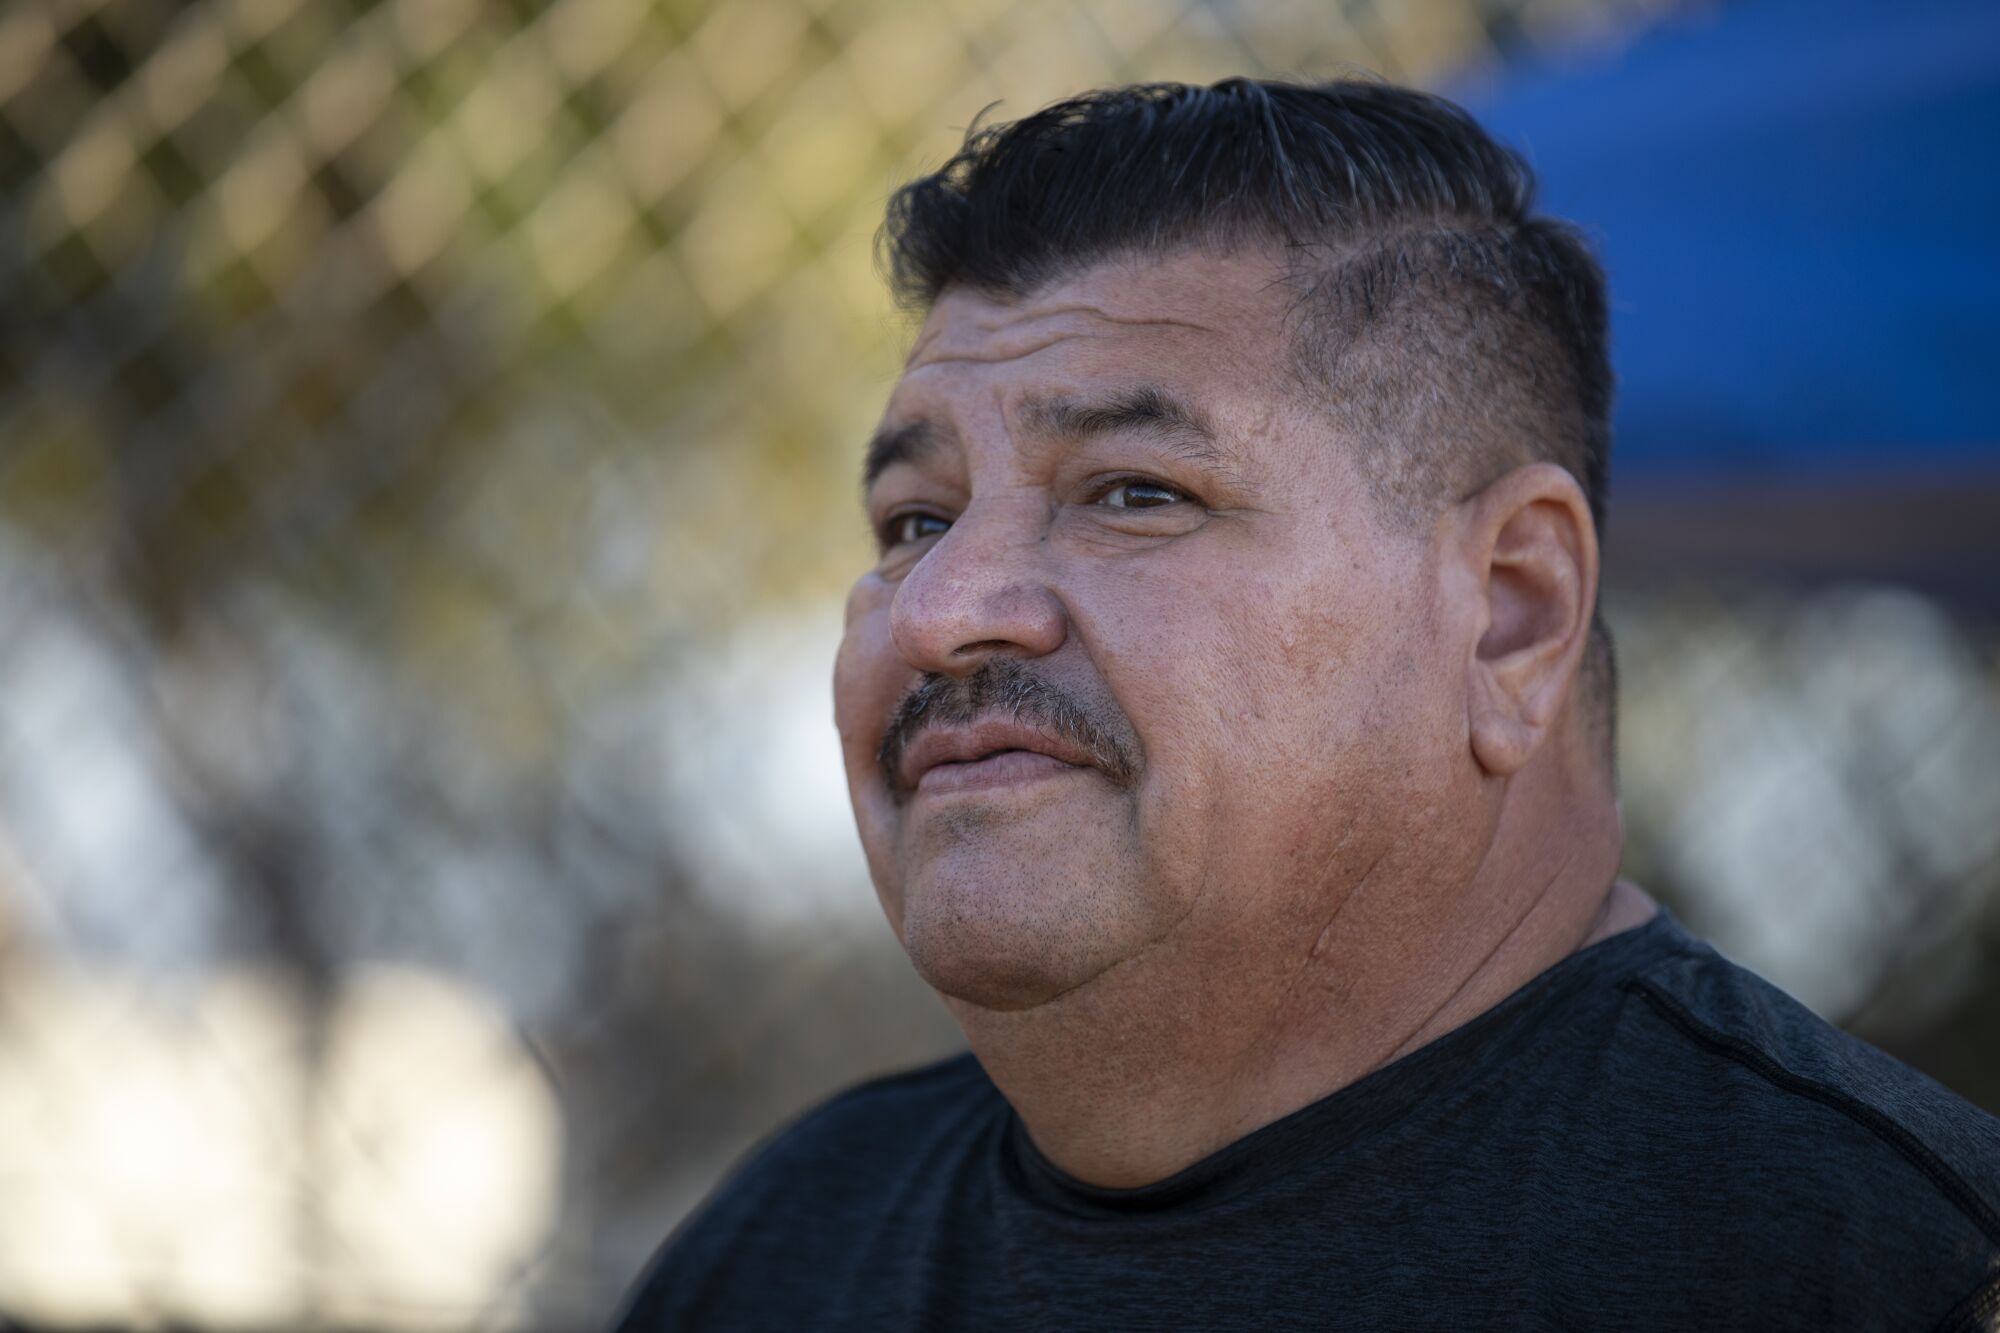 Francisco Ortiz, program director for Memorial Soccer League, has been with the soccer program for 21 years